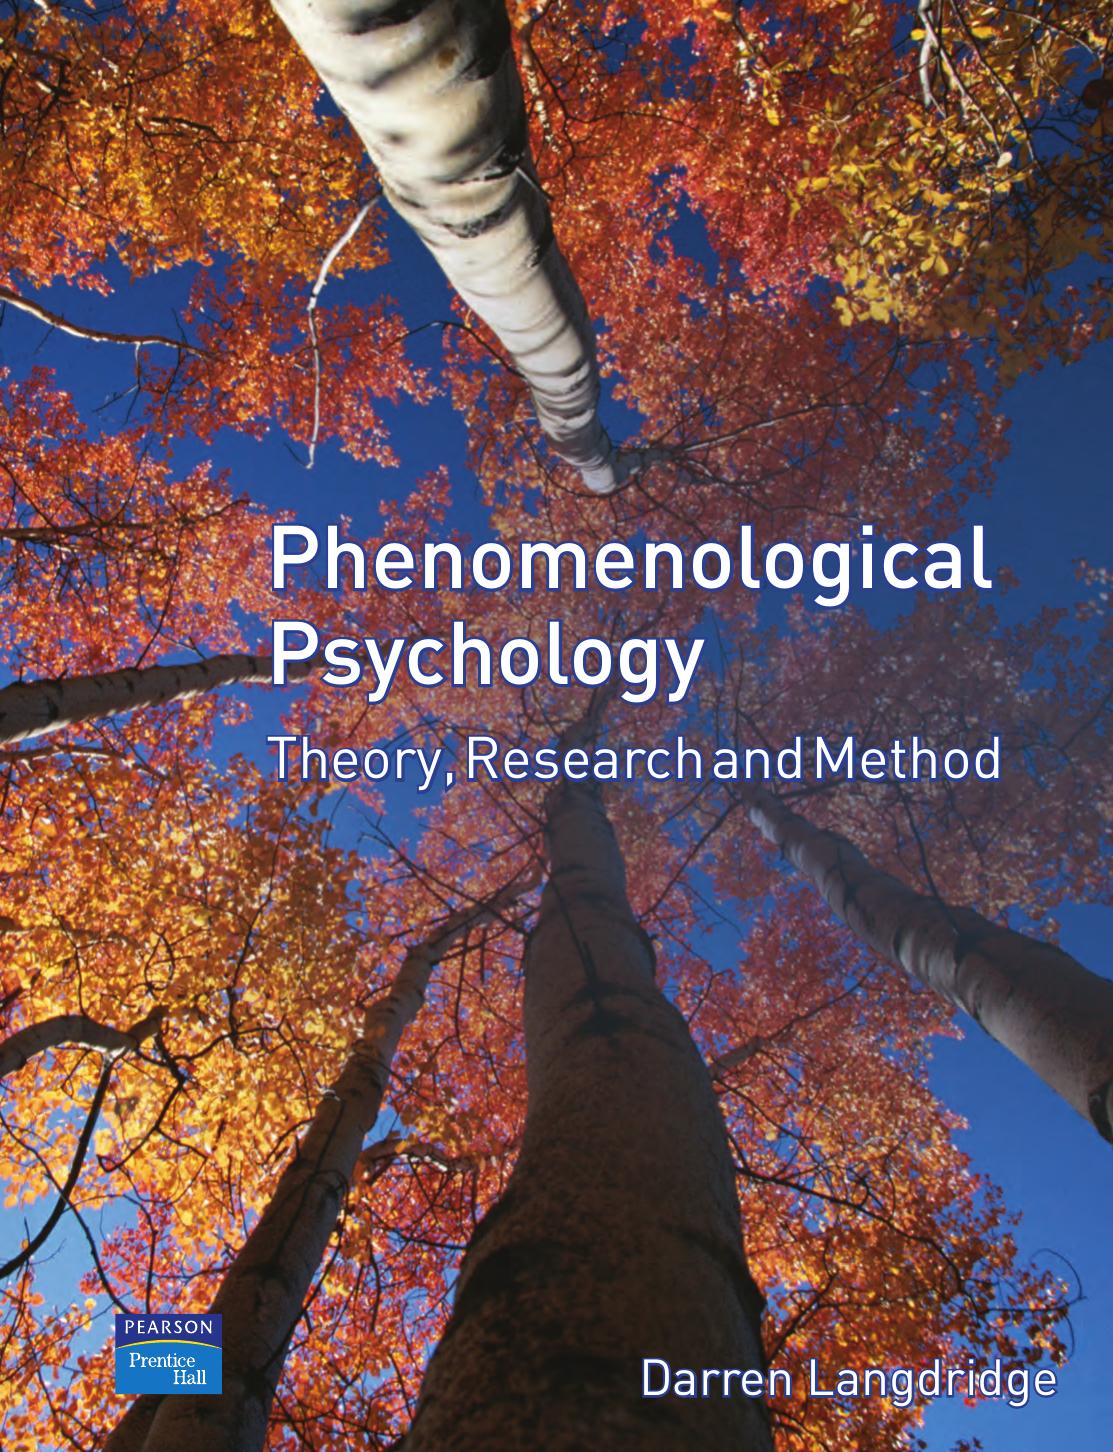 Download Phenomenological Psychology Theory, Research and Method SoftArchive